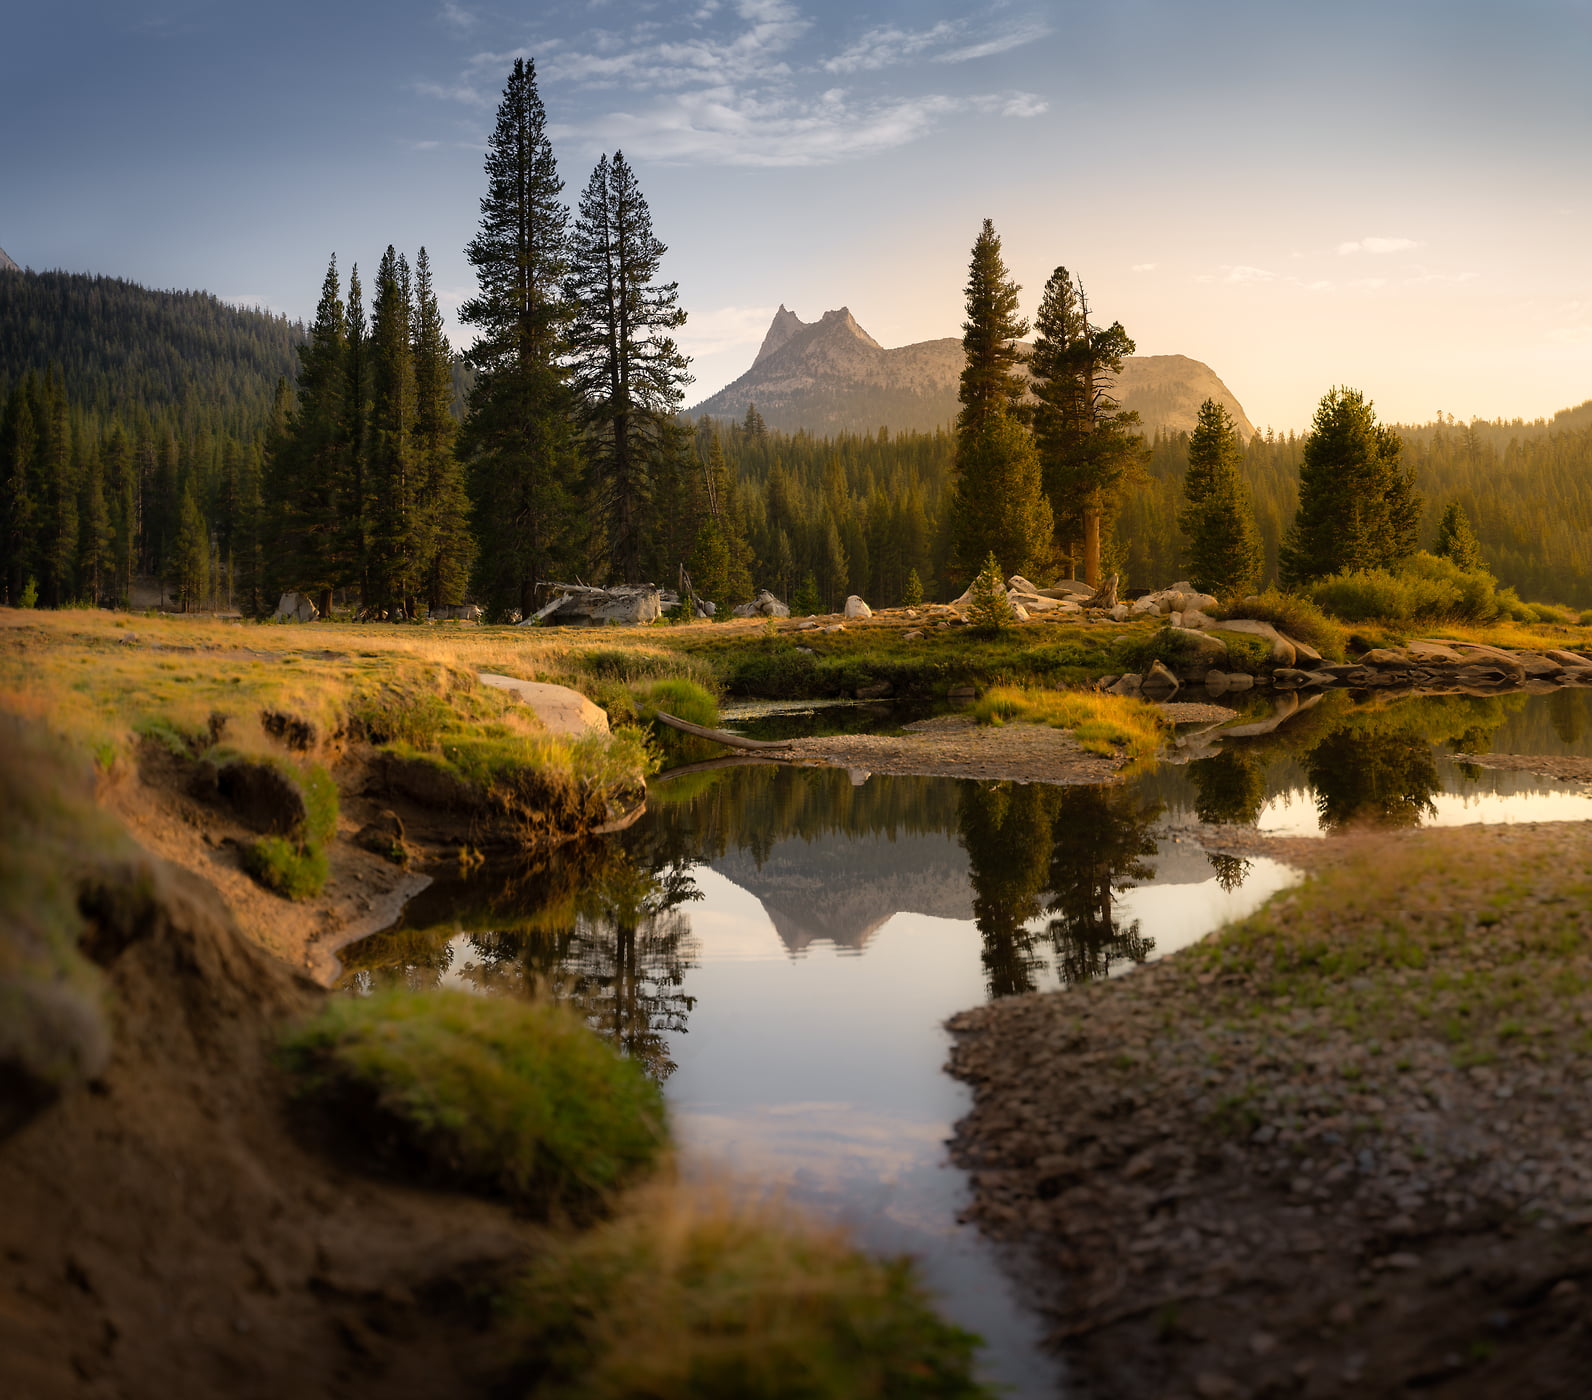 285 megapixels! A very high resolution, large-format VAST photo print of a nature scene with a stream and a forest and mountain in the background; peaceful nature landscape photograph created by Jeff Lewis in Tuolumne Meadows, Yosemite National Park, California.